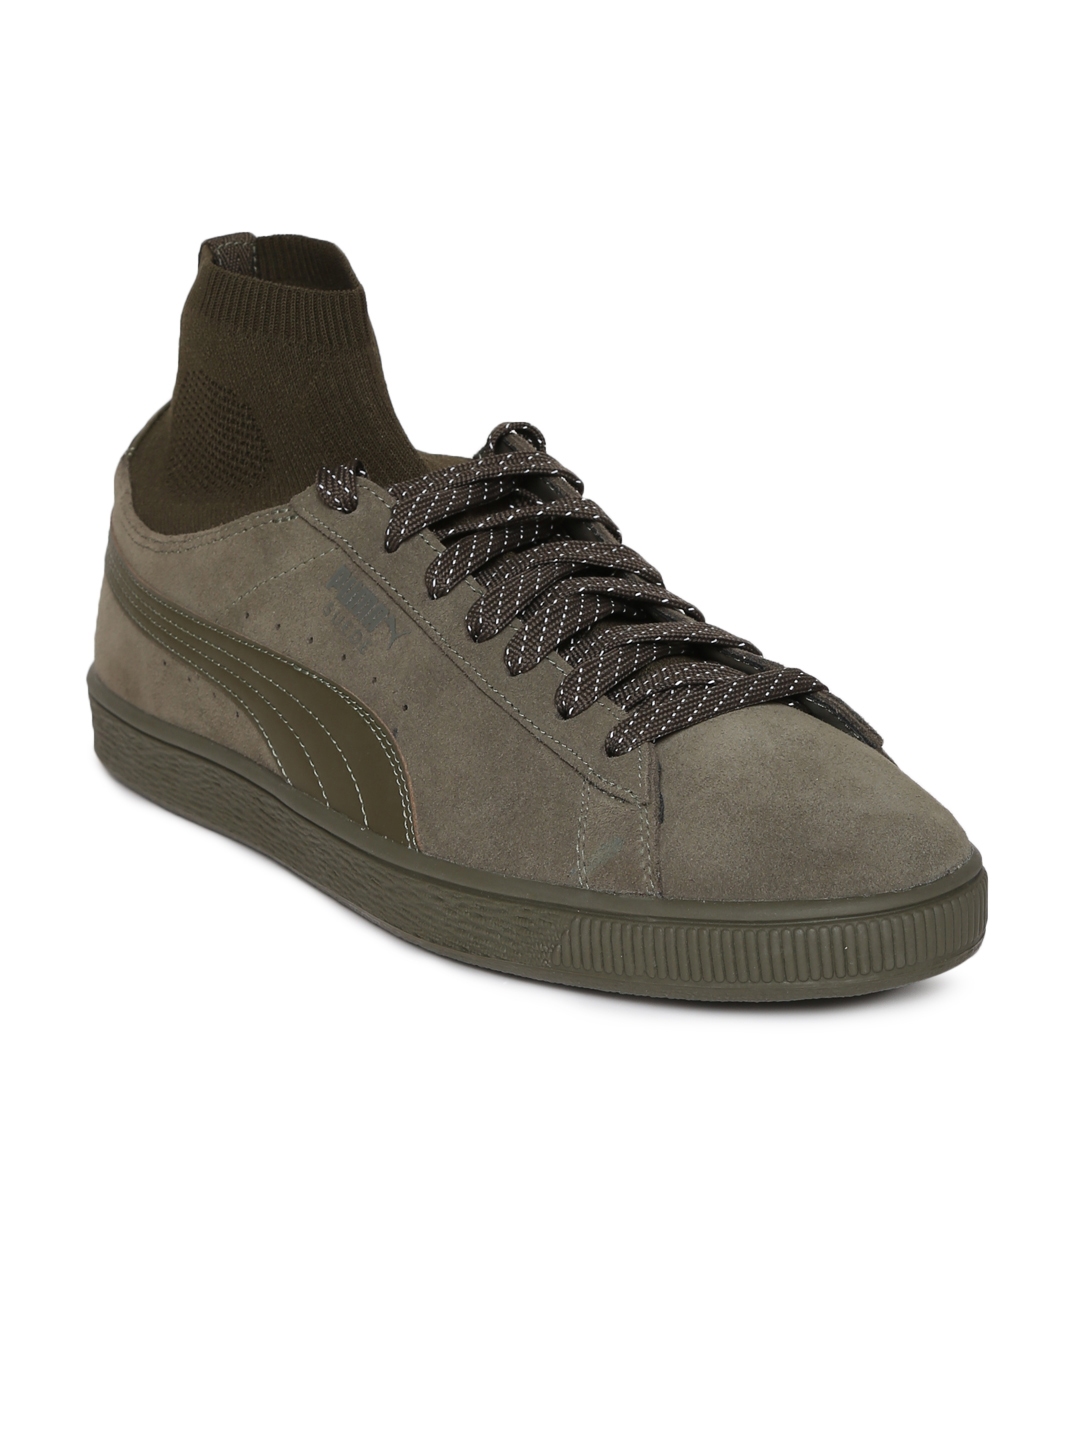 Buy Puma Unisex Olive Green Suede Classic Sock Sneakers - Casual Shoes ...